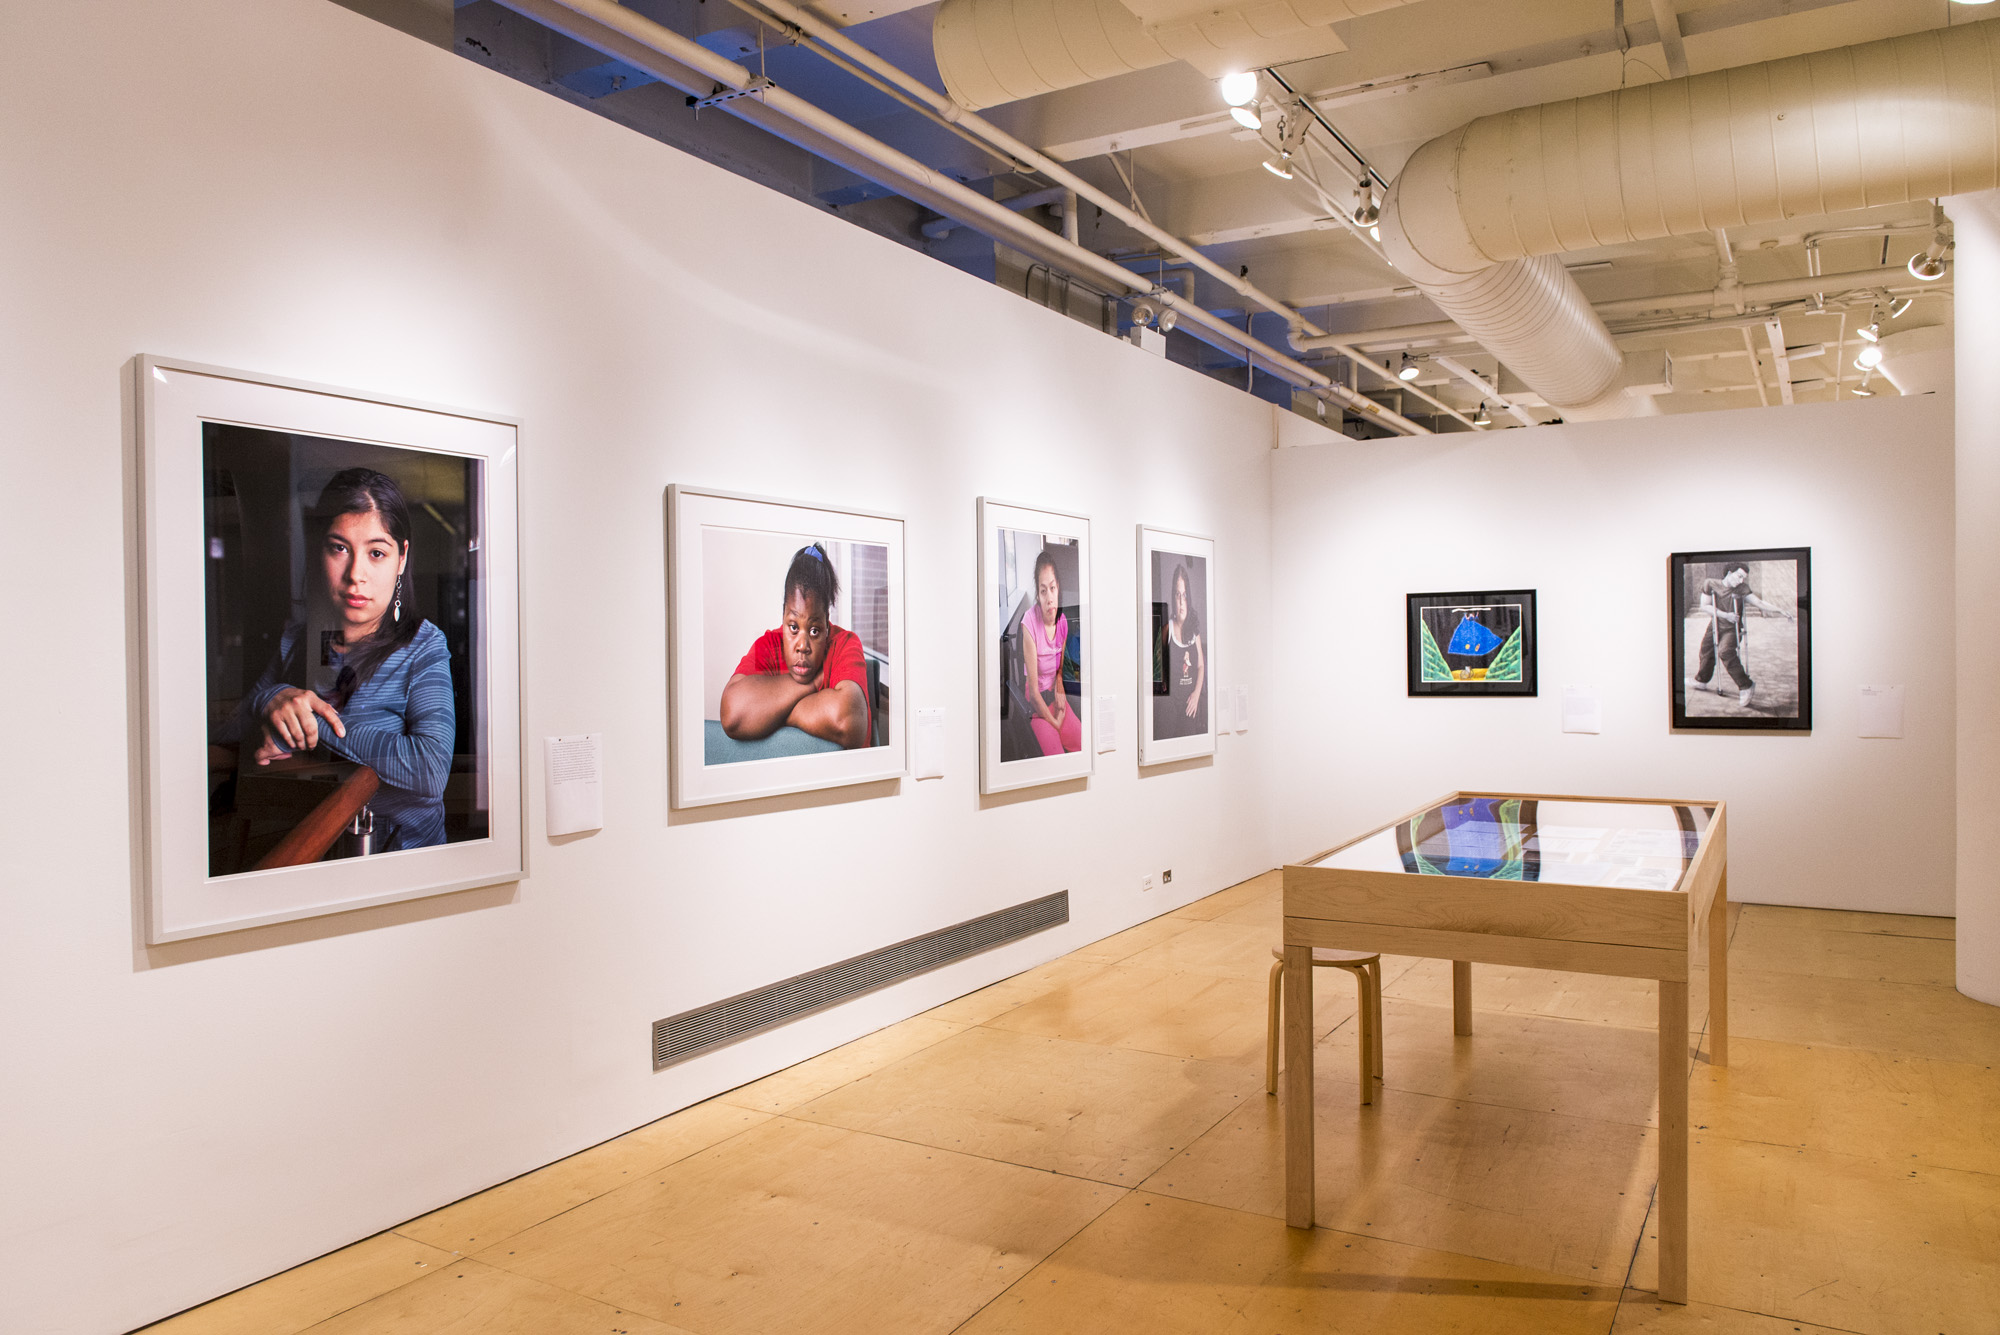 Image: a view of two gallery walls featuring primarily large format photography portraits; to the right is a display table with printed ephemera. Photo by Ryan Edmund. 